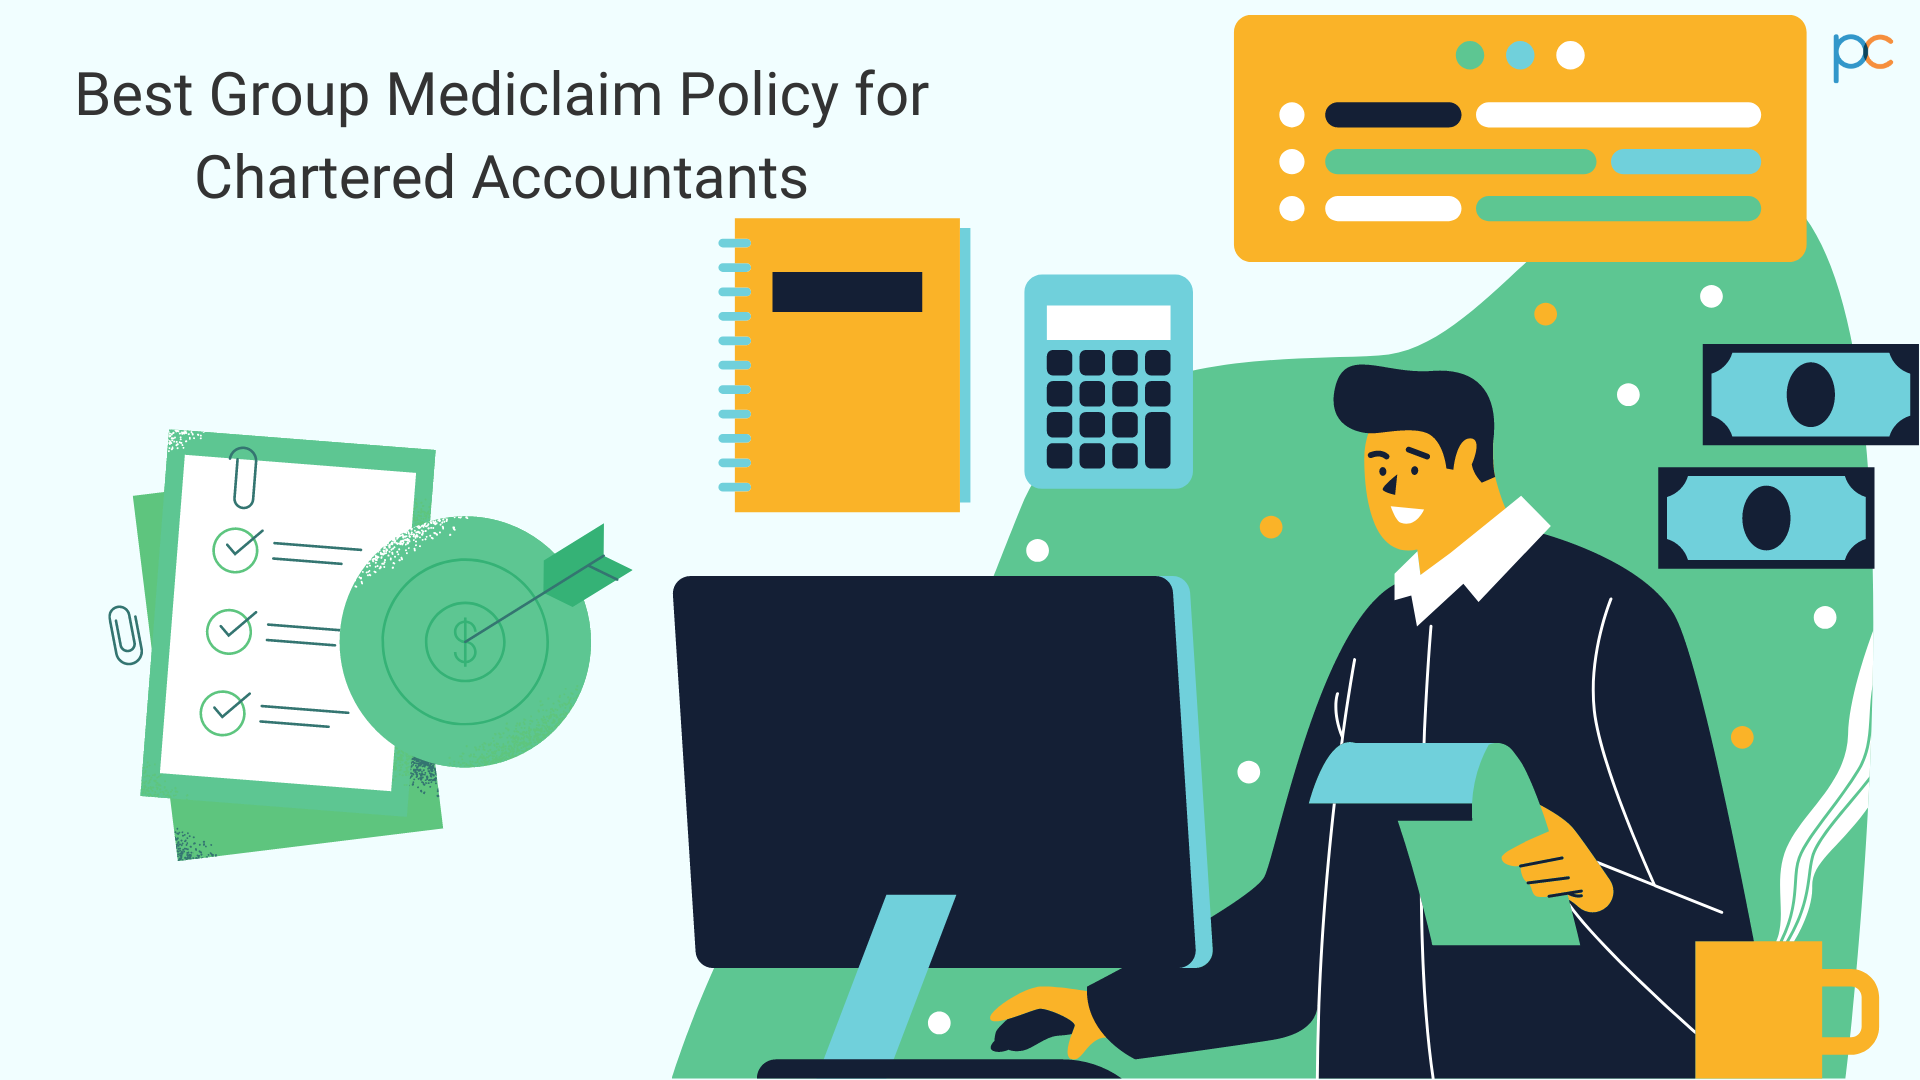 Best Group Mediclaim Policy For Chartered Accountants in India - Everything You Want to Know